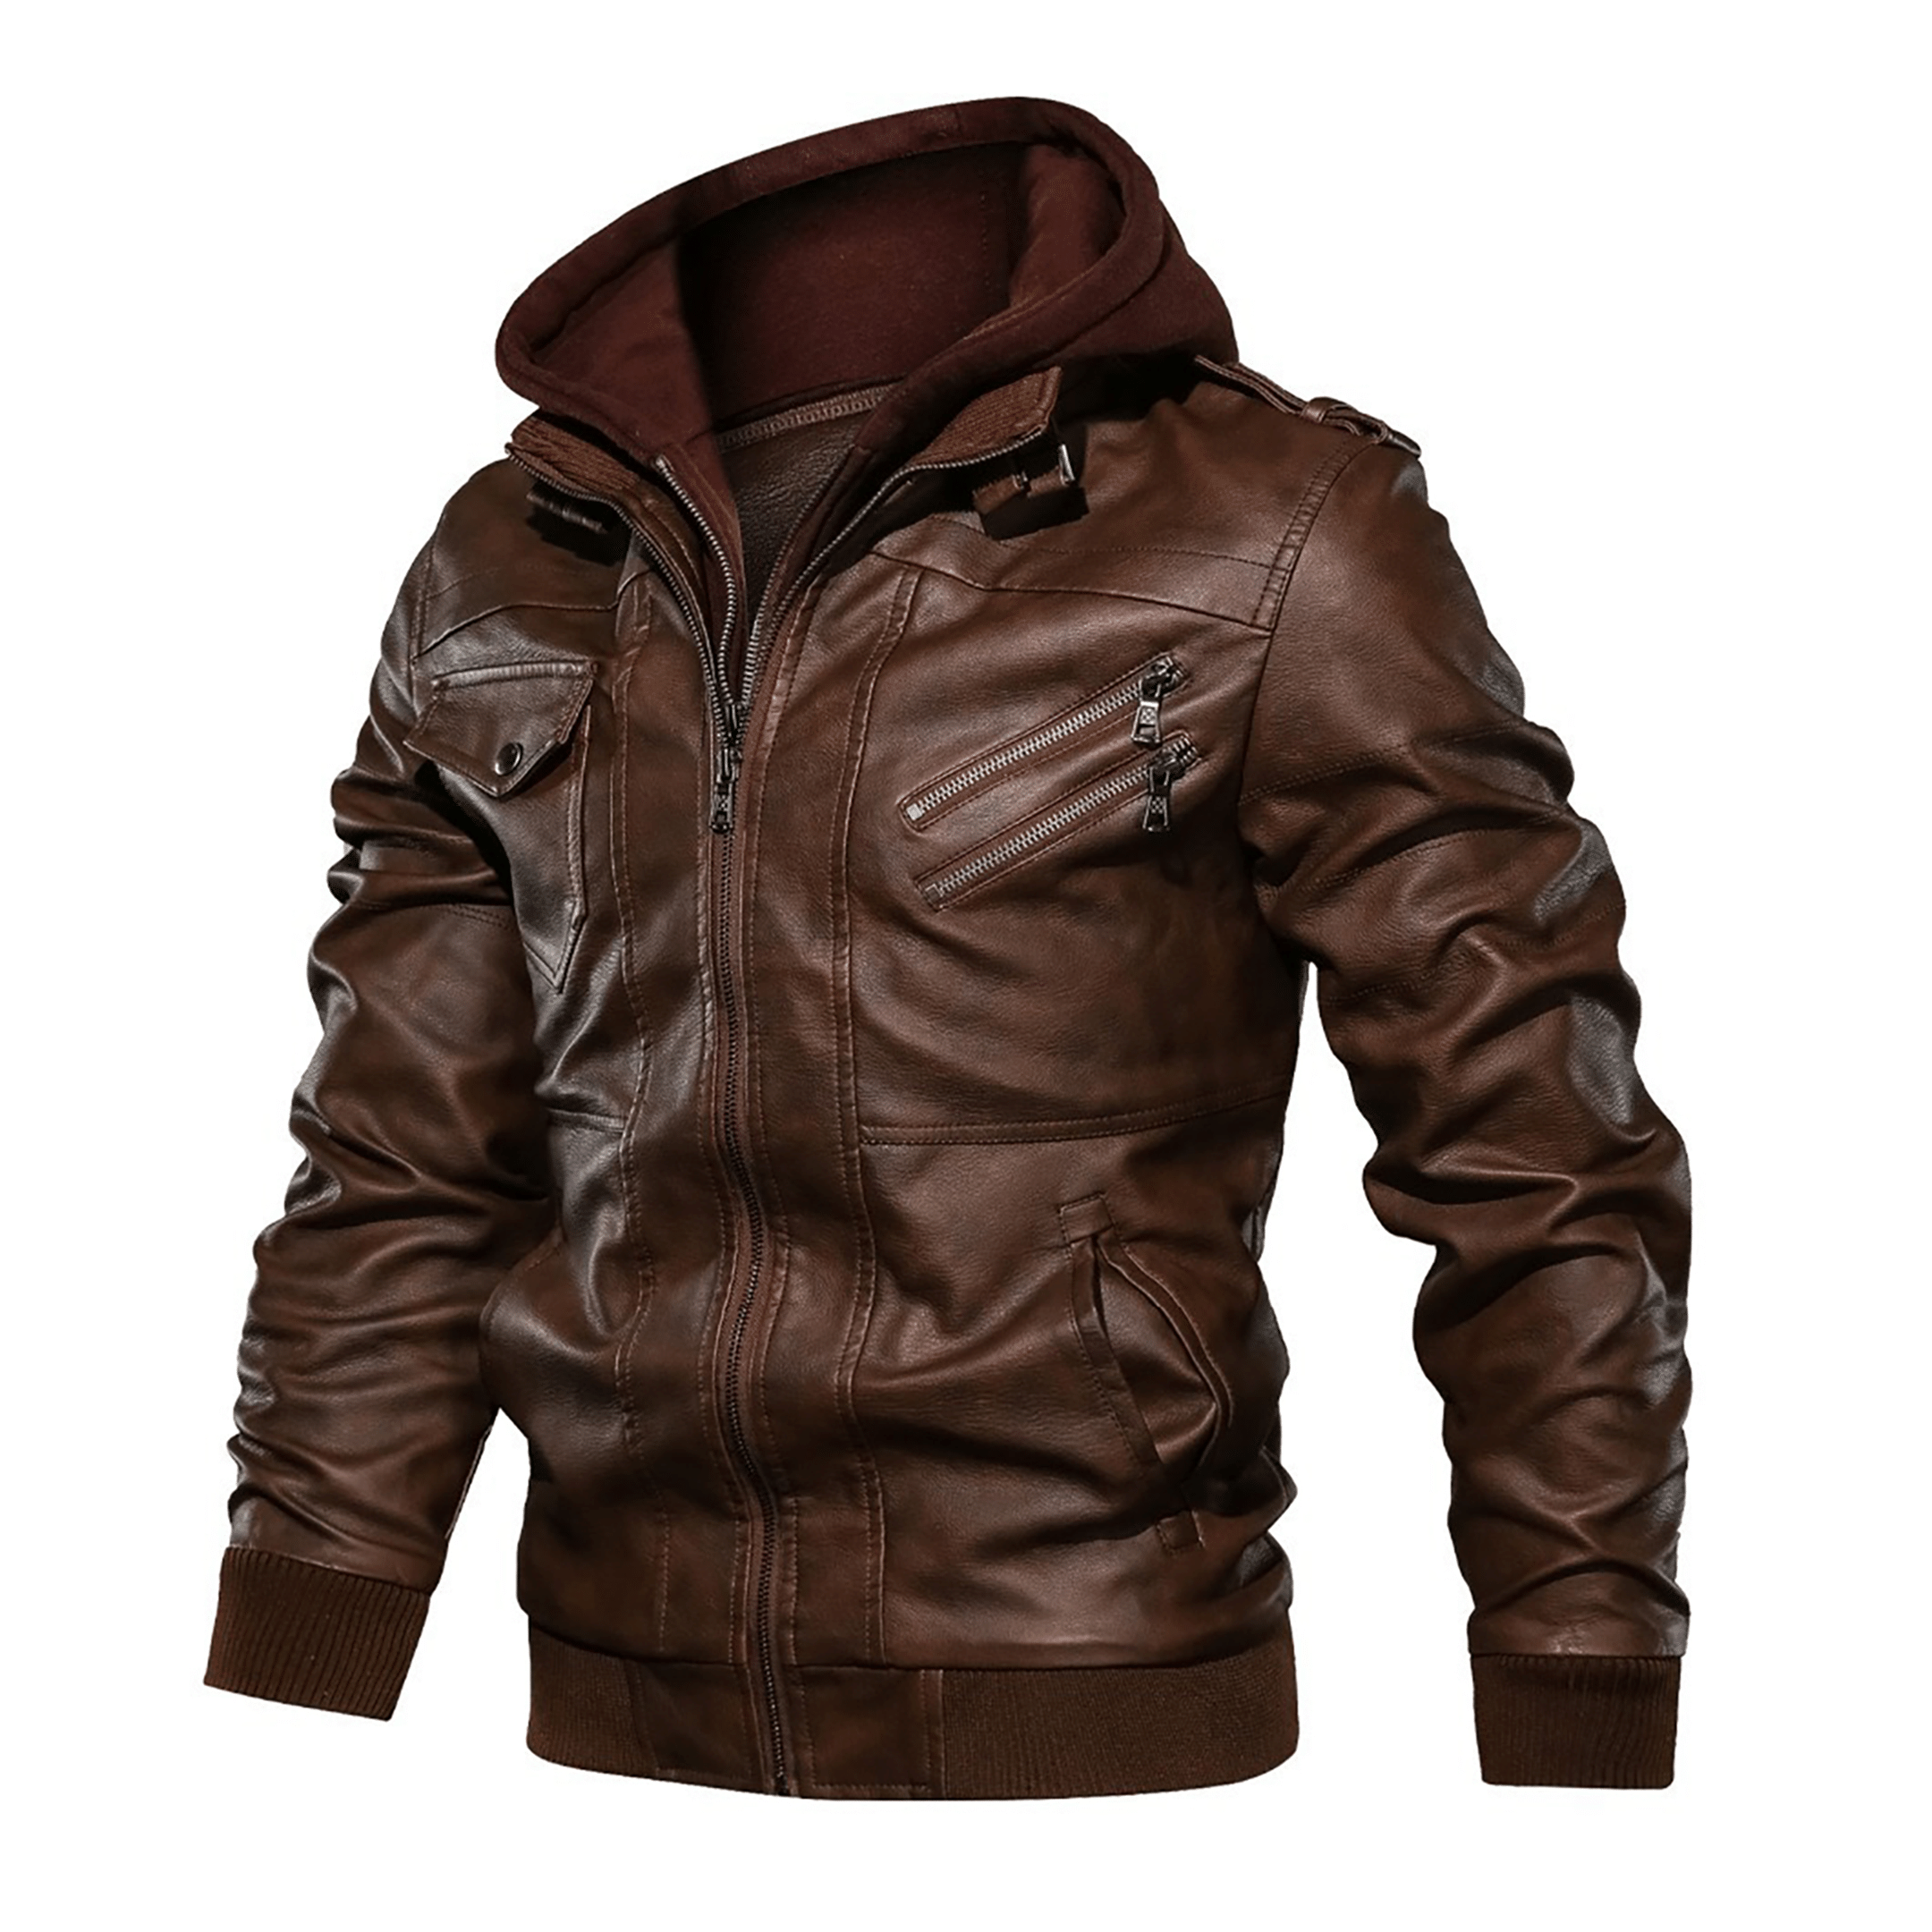 Top leather jackets and latest products 297